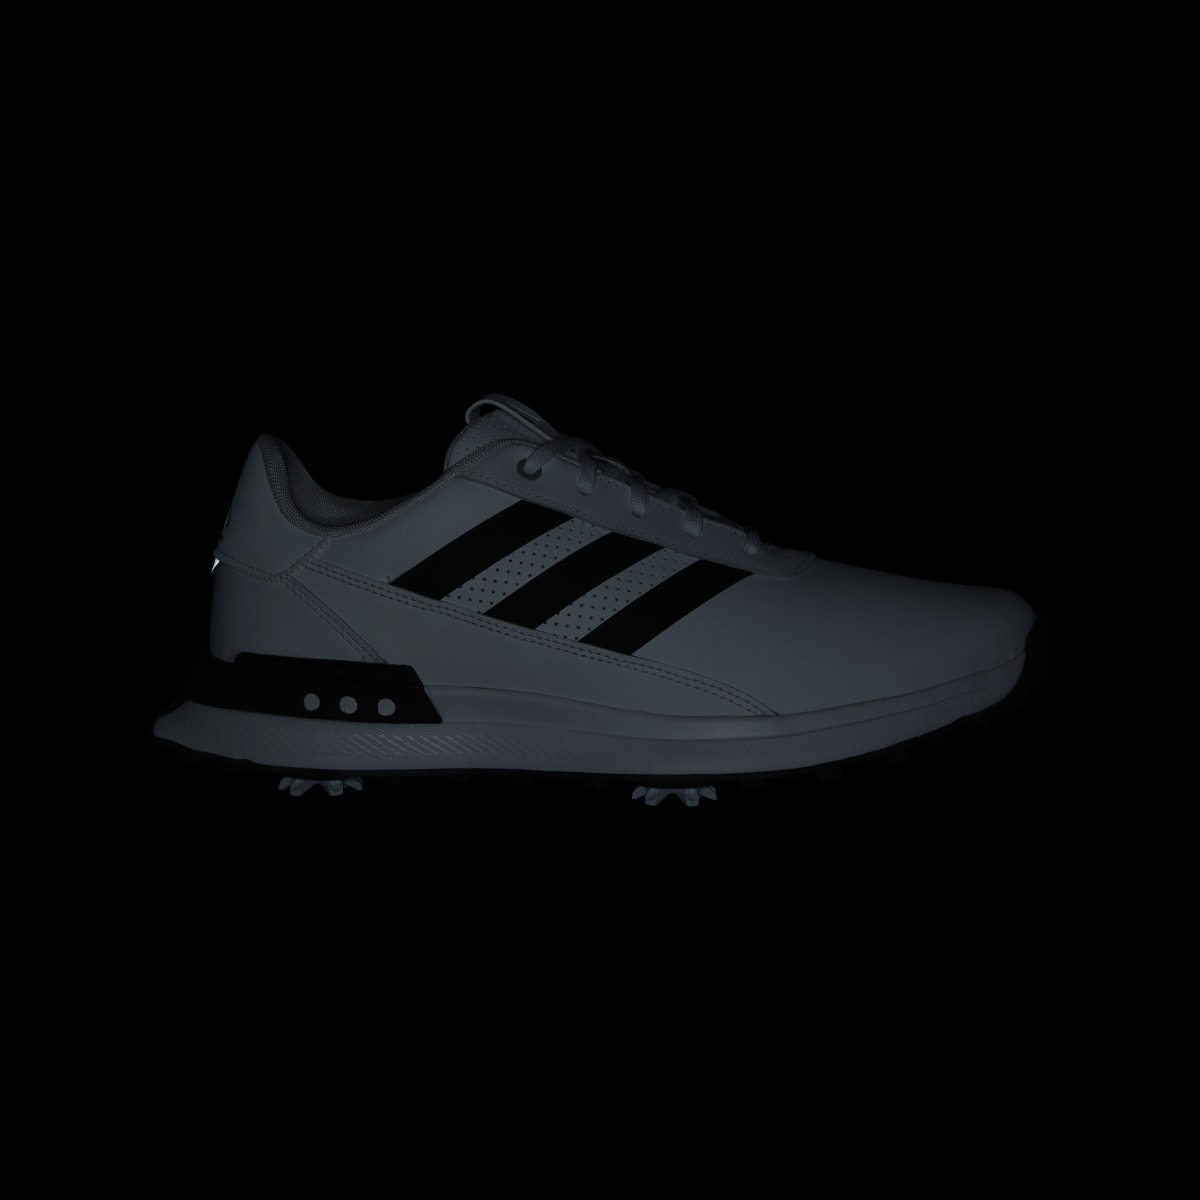 Adidas S2G 24 Golf Shoes. 5